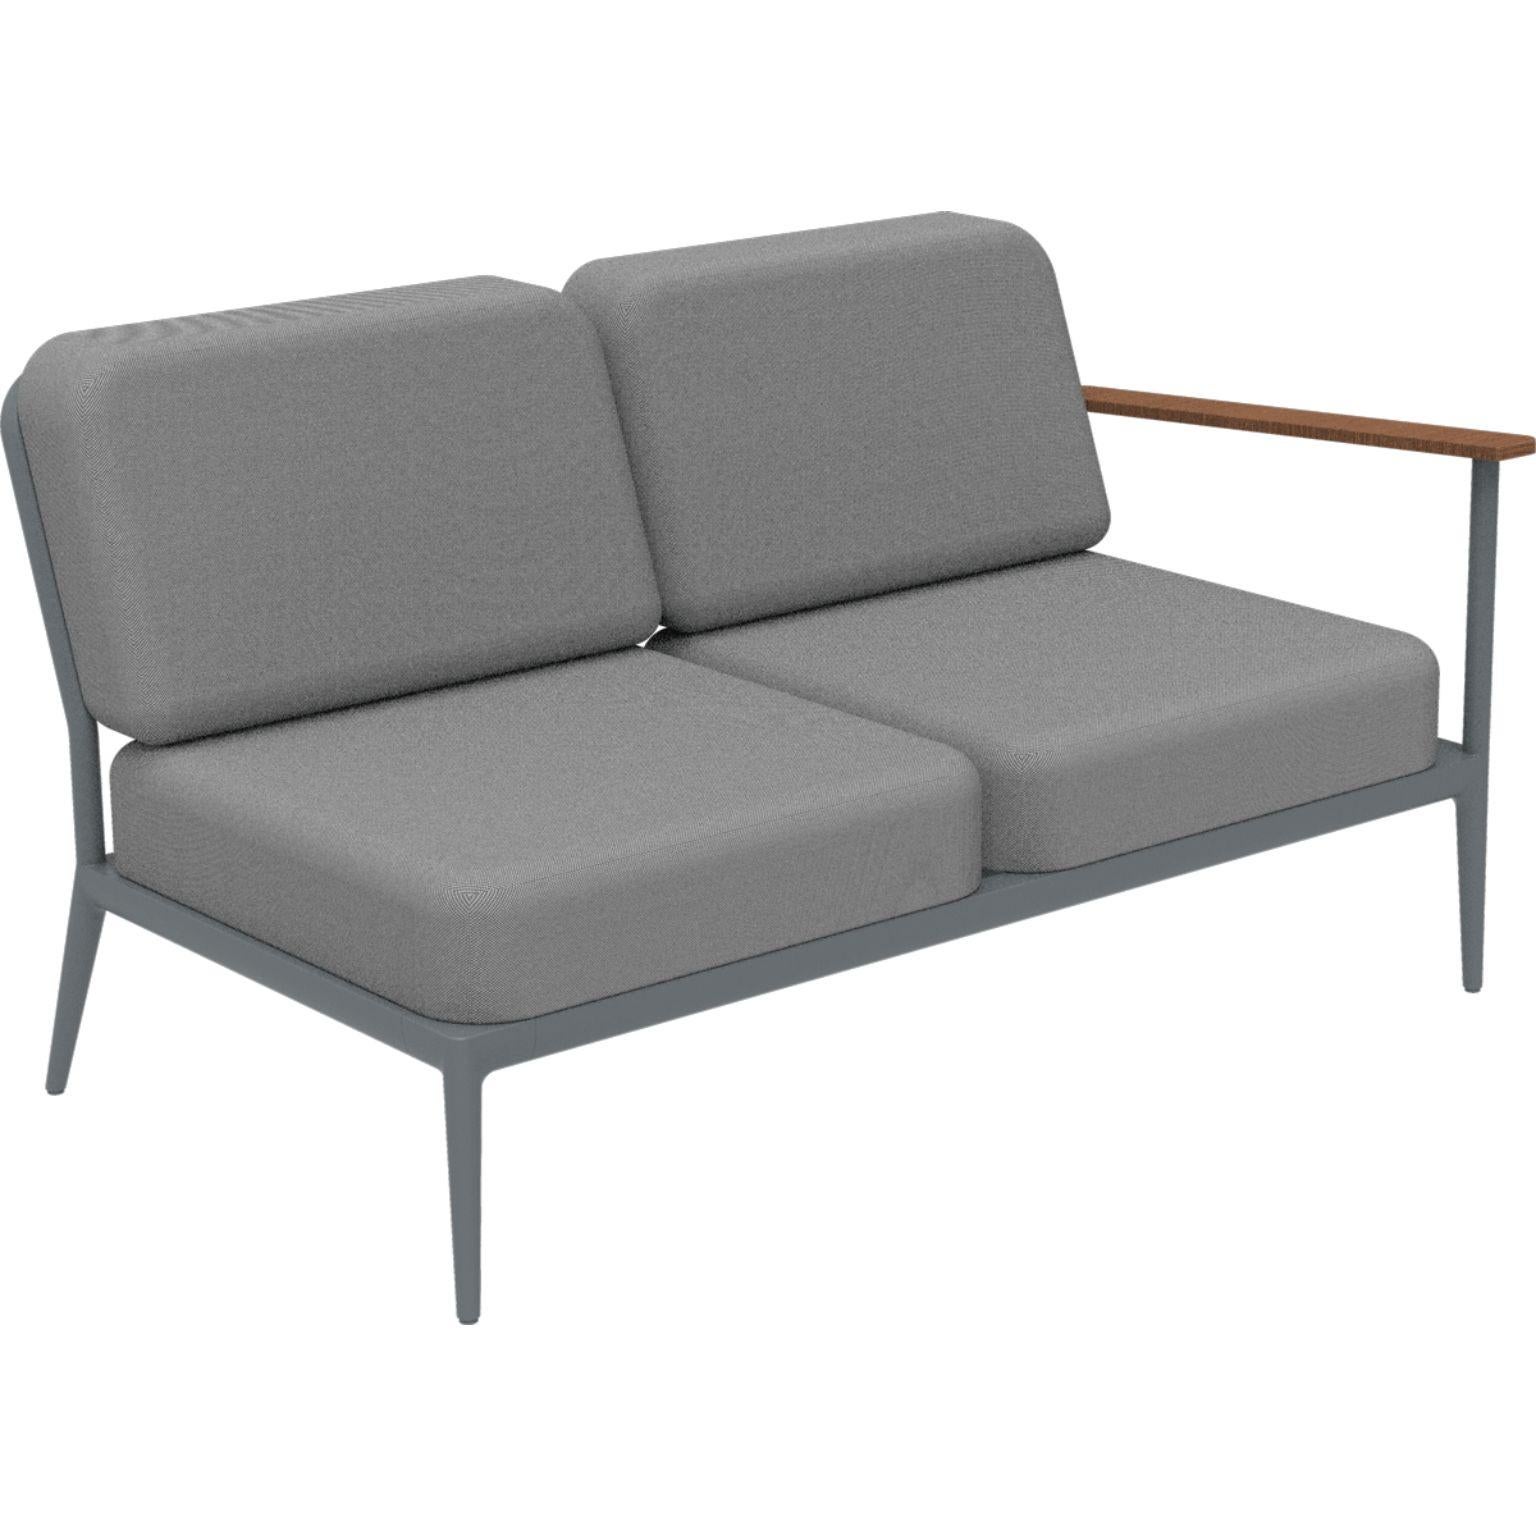 Nature Grey Double Left modular sofa by MOWEE
Dimensions: D85 x W144 x H81 cm (seat height 42 cm).
Material: Aluminum, upholstery and Iroko Wood.
Weight: 29 kg.
Also available in different colors and finishes. 

An unmistakable collection for